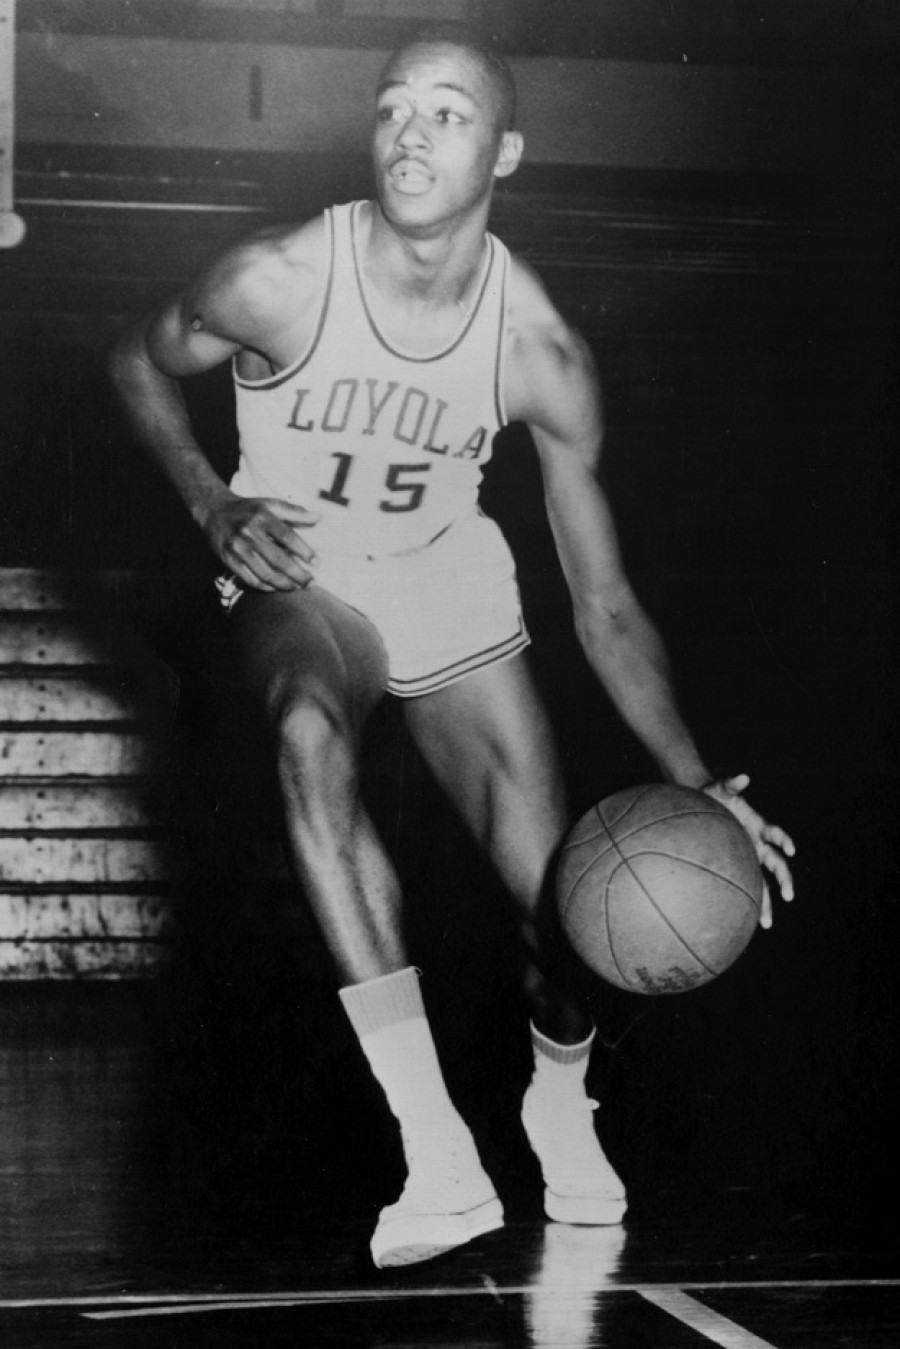 Loyola makes basketball history, part one | WBEZ Chicago